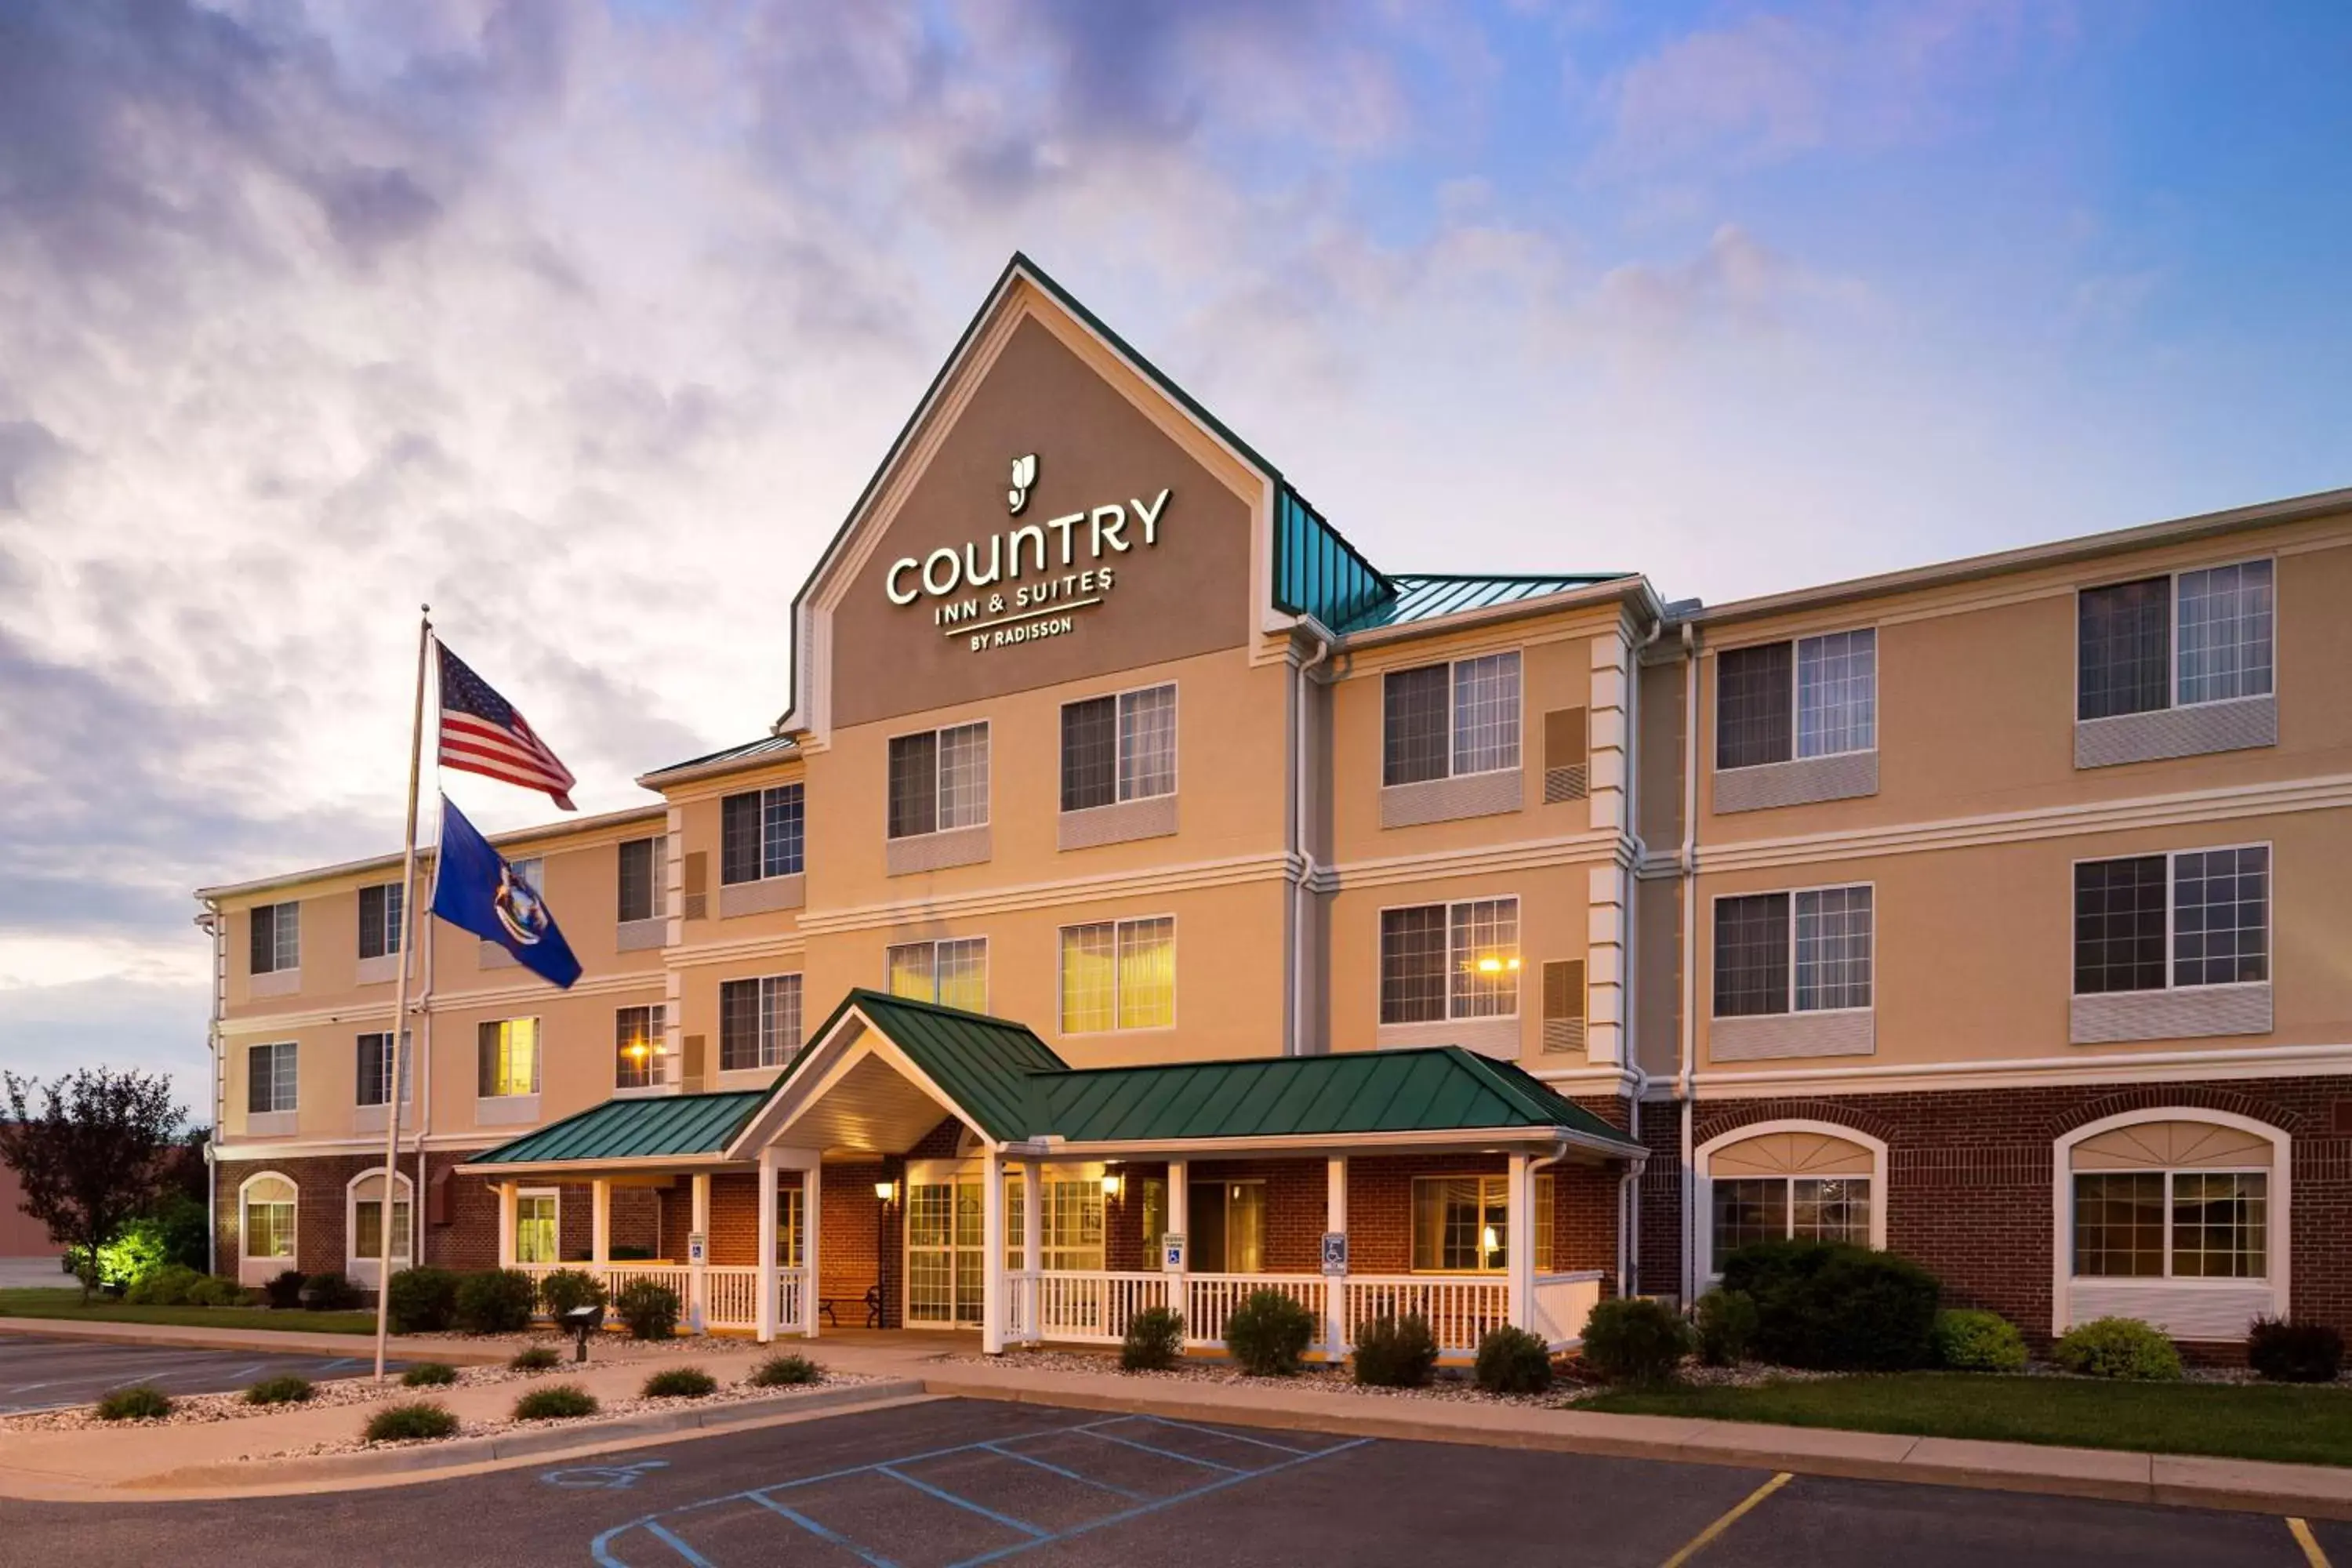 Property building in Country Inn & Suites by Radisson, Big Rapids, MI